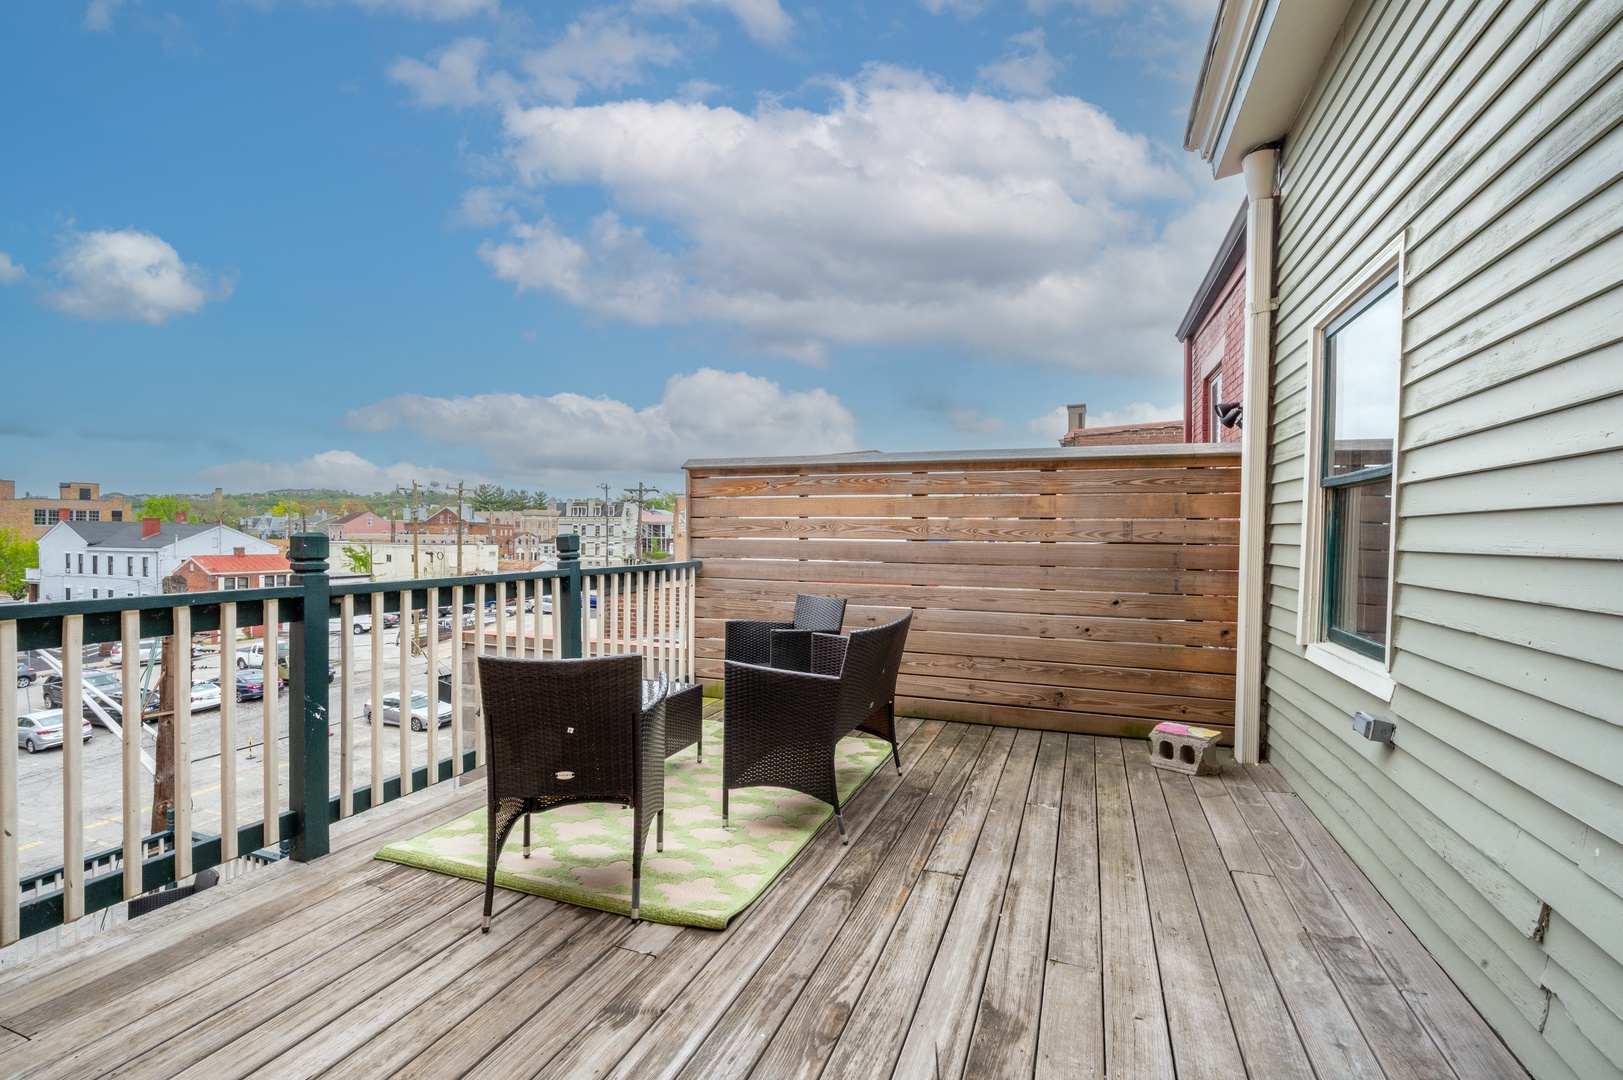 Unit 3: Take in some fresh air & sunshine on the back deck